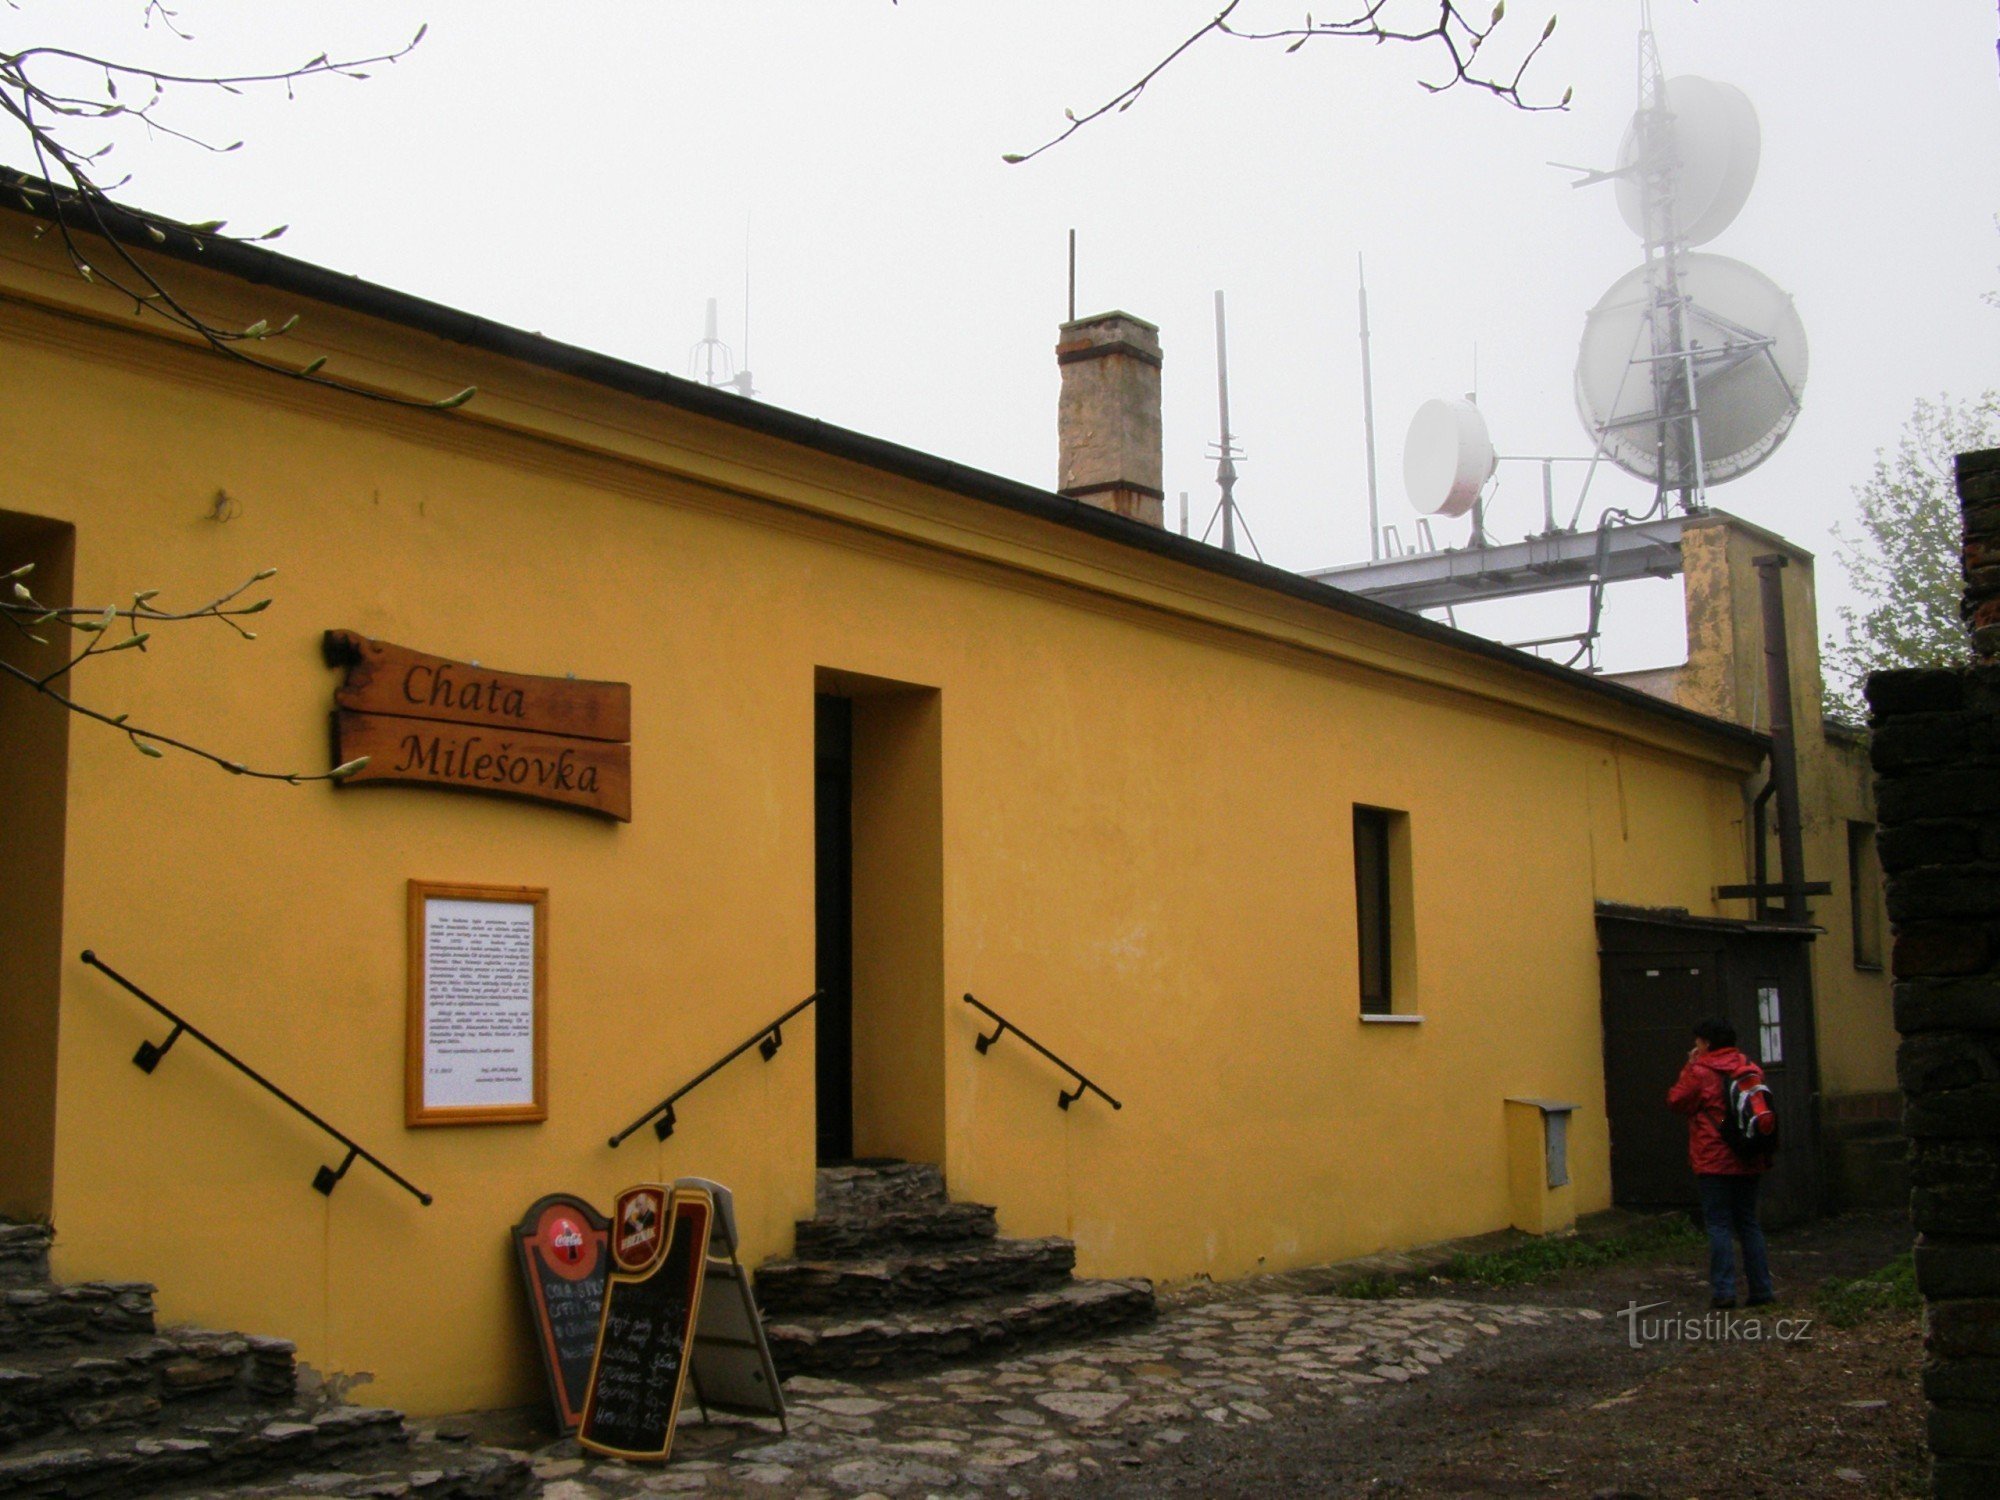 in addition to the buffet, there is also a newly opened restaurant in Milešovka